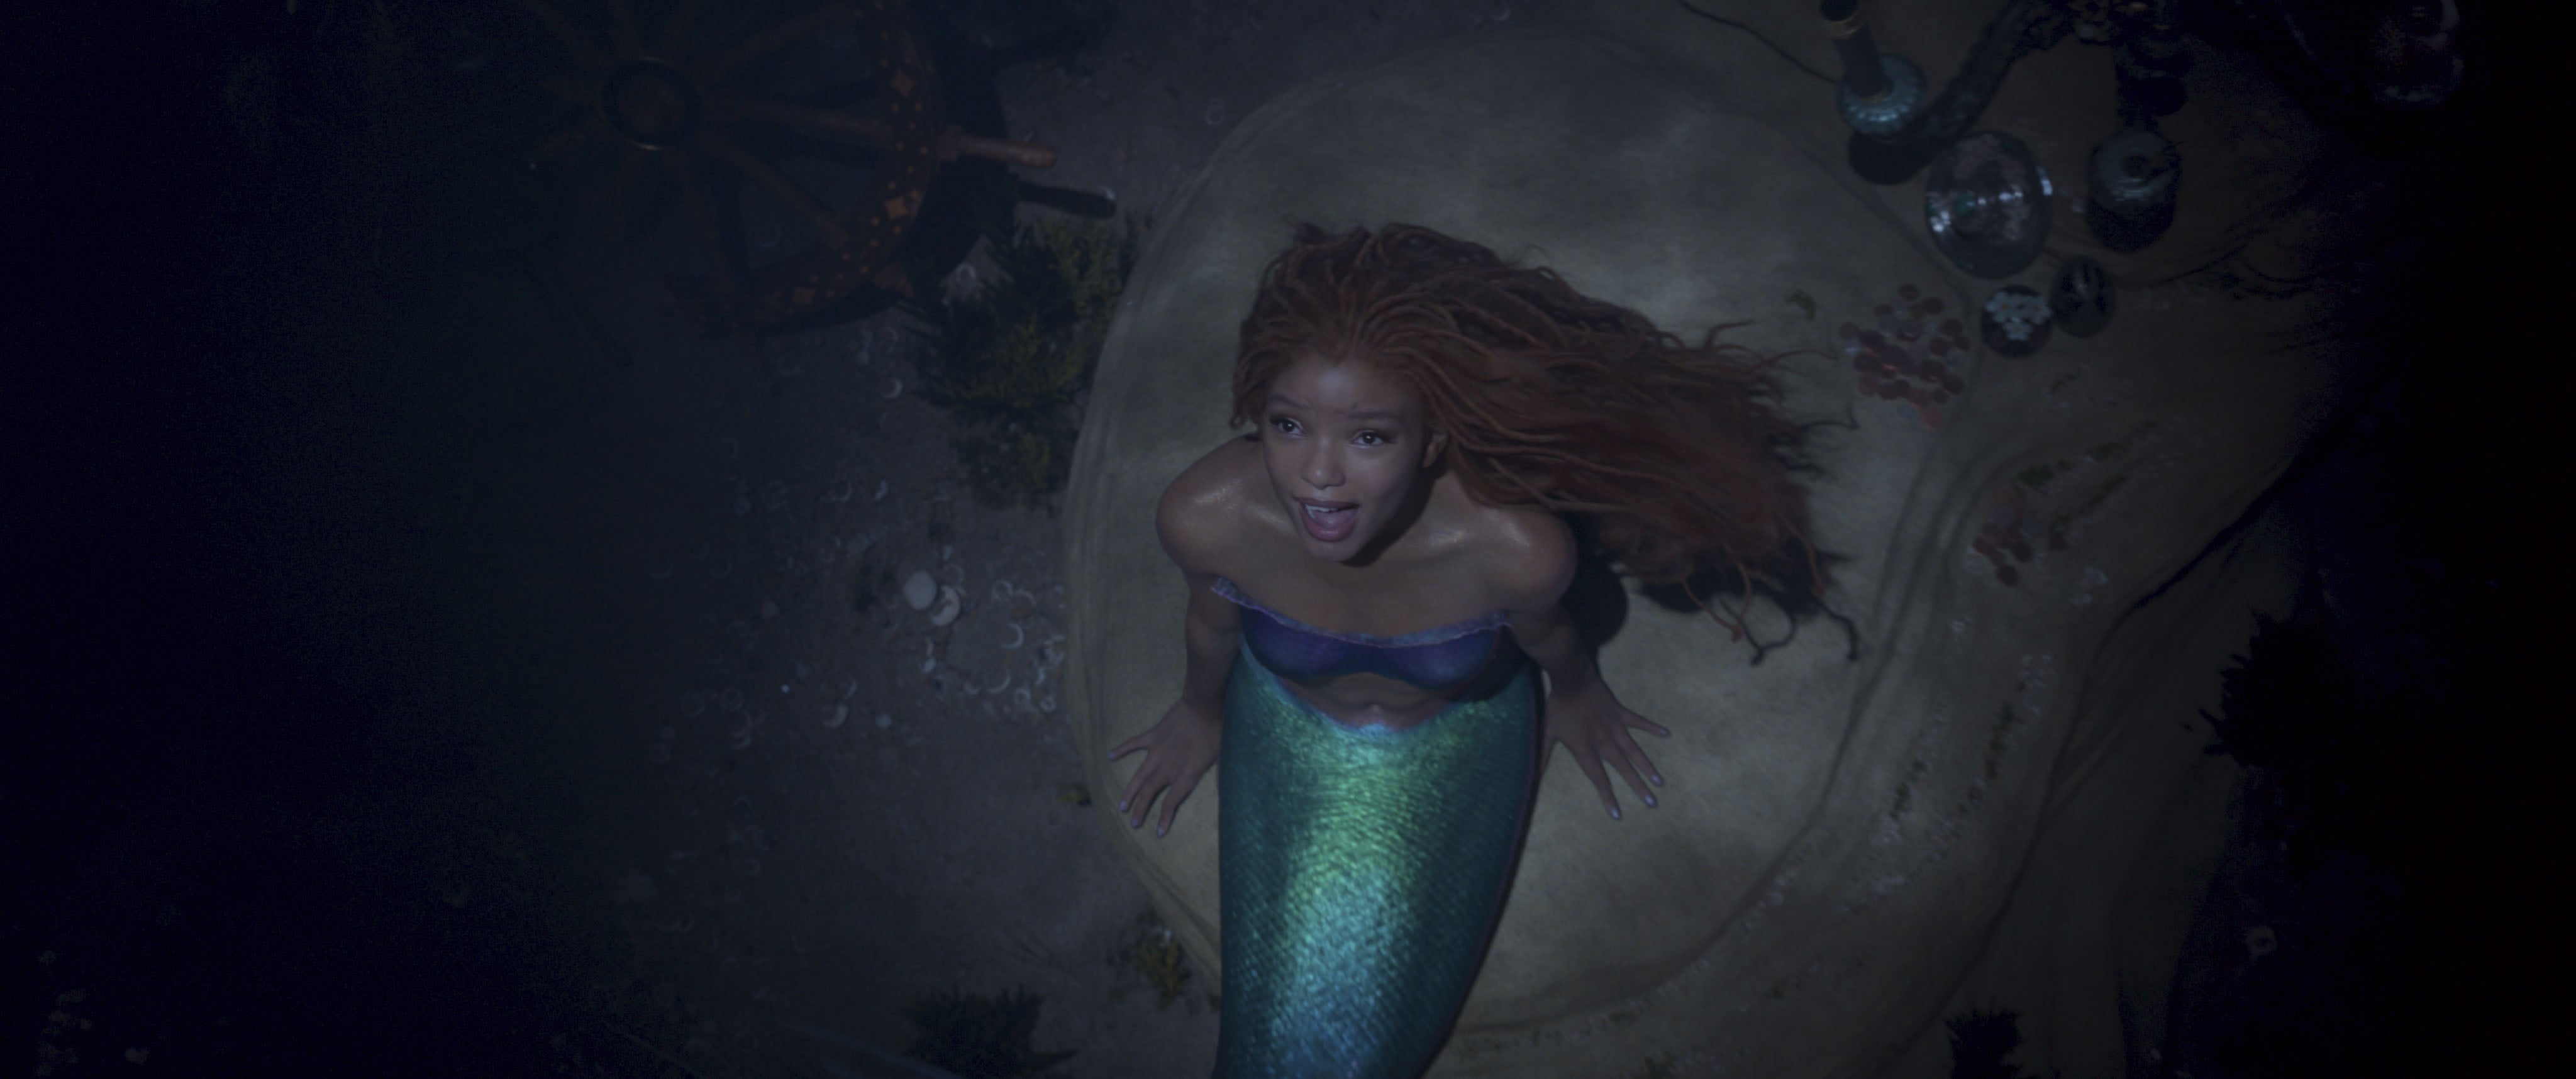 The Little Mermaid' Live-Action Cast and Where You've Seen Them Before